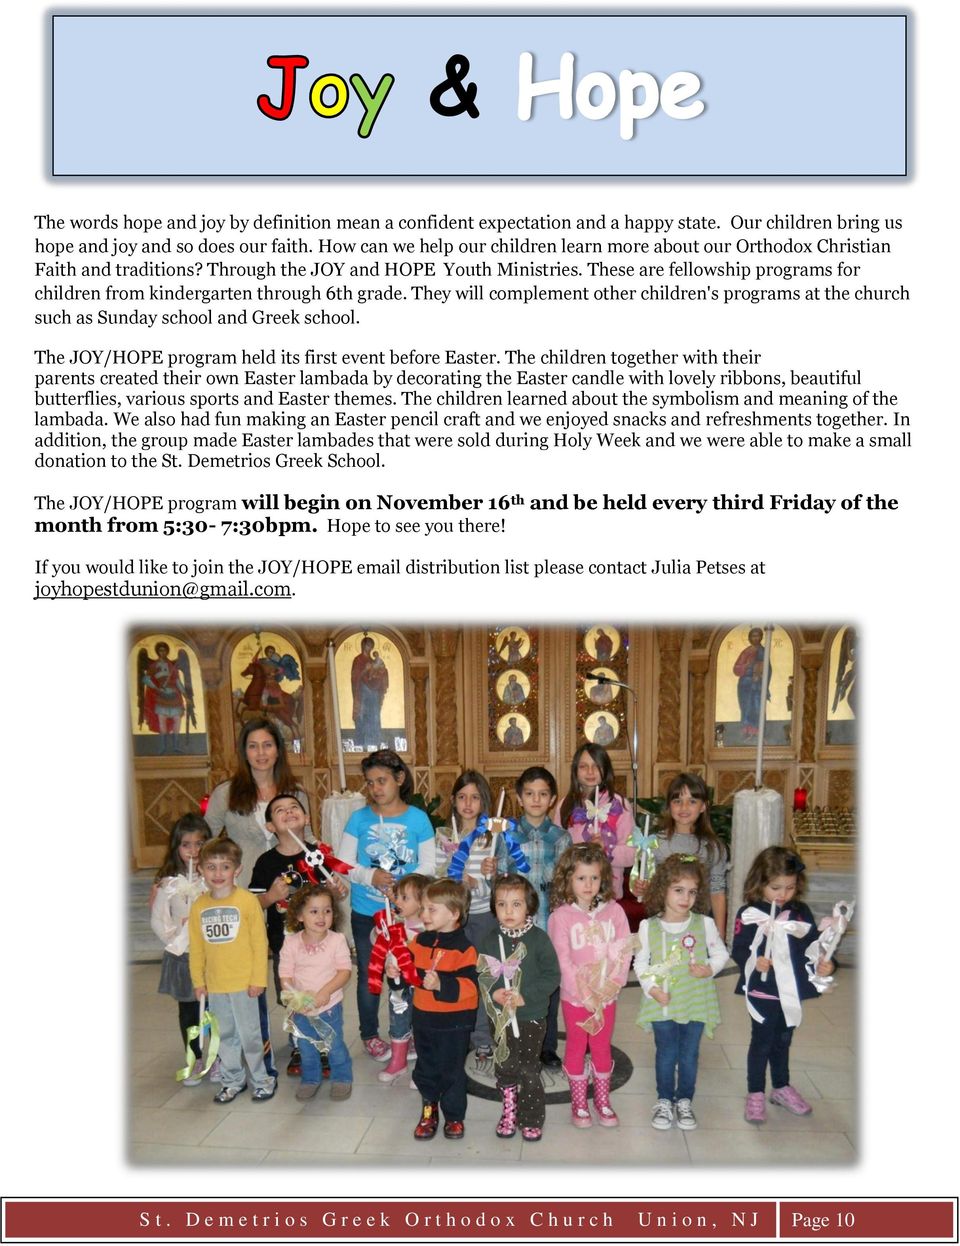 These are fellowship programs for children from kindergarten through 6th grade. They will complement other children's programs at the church such as Sunday school and Greek school.